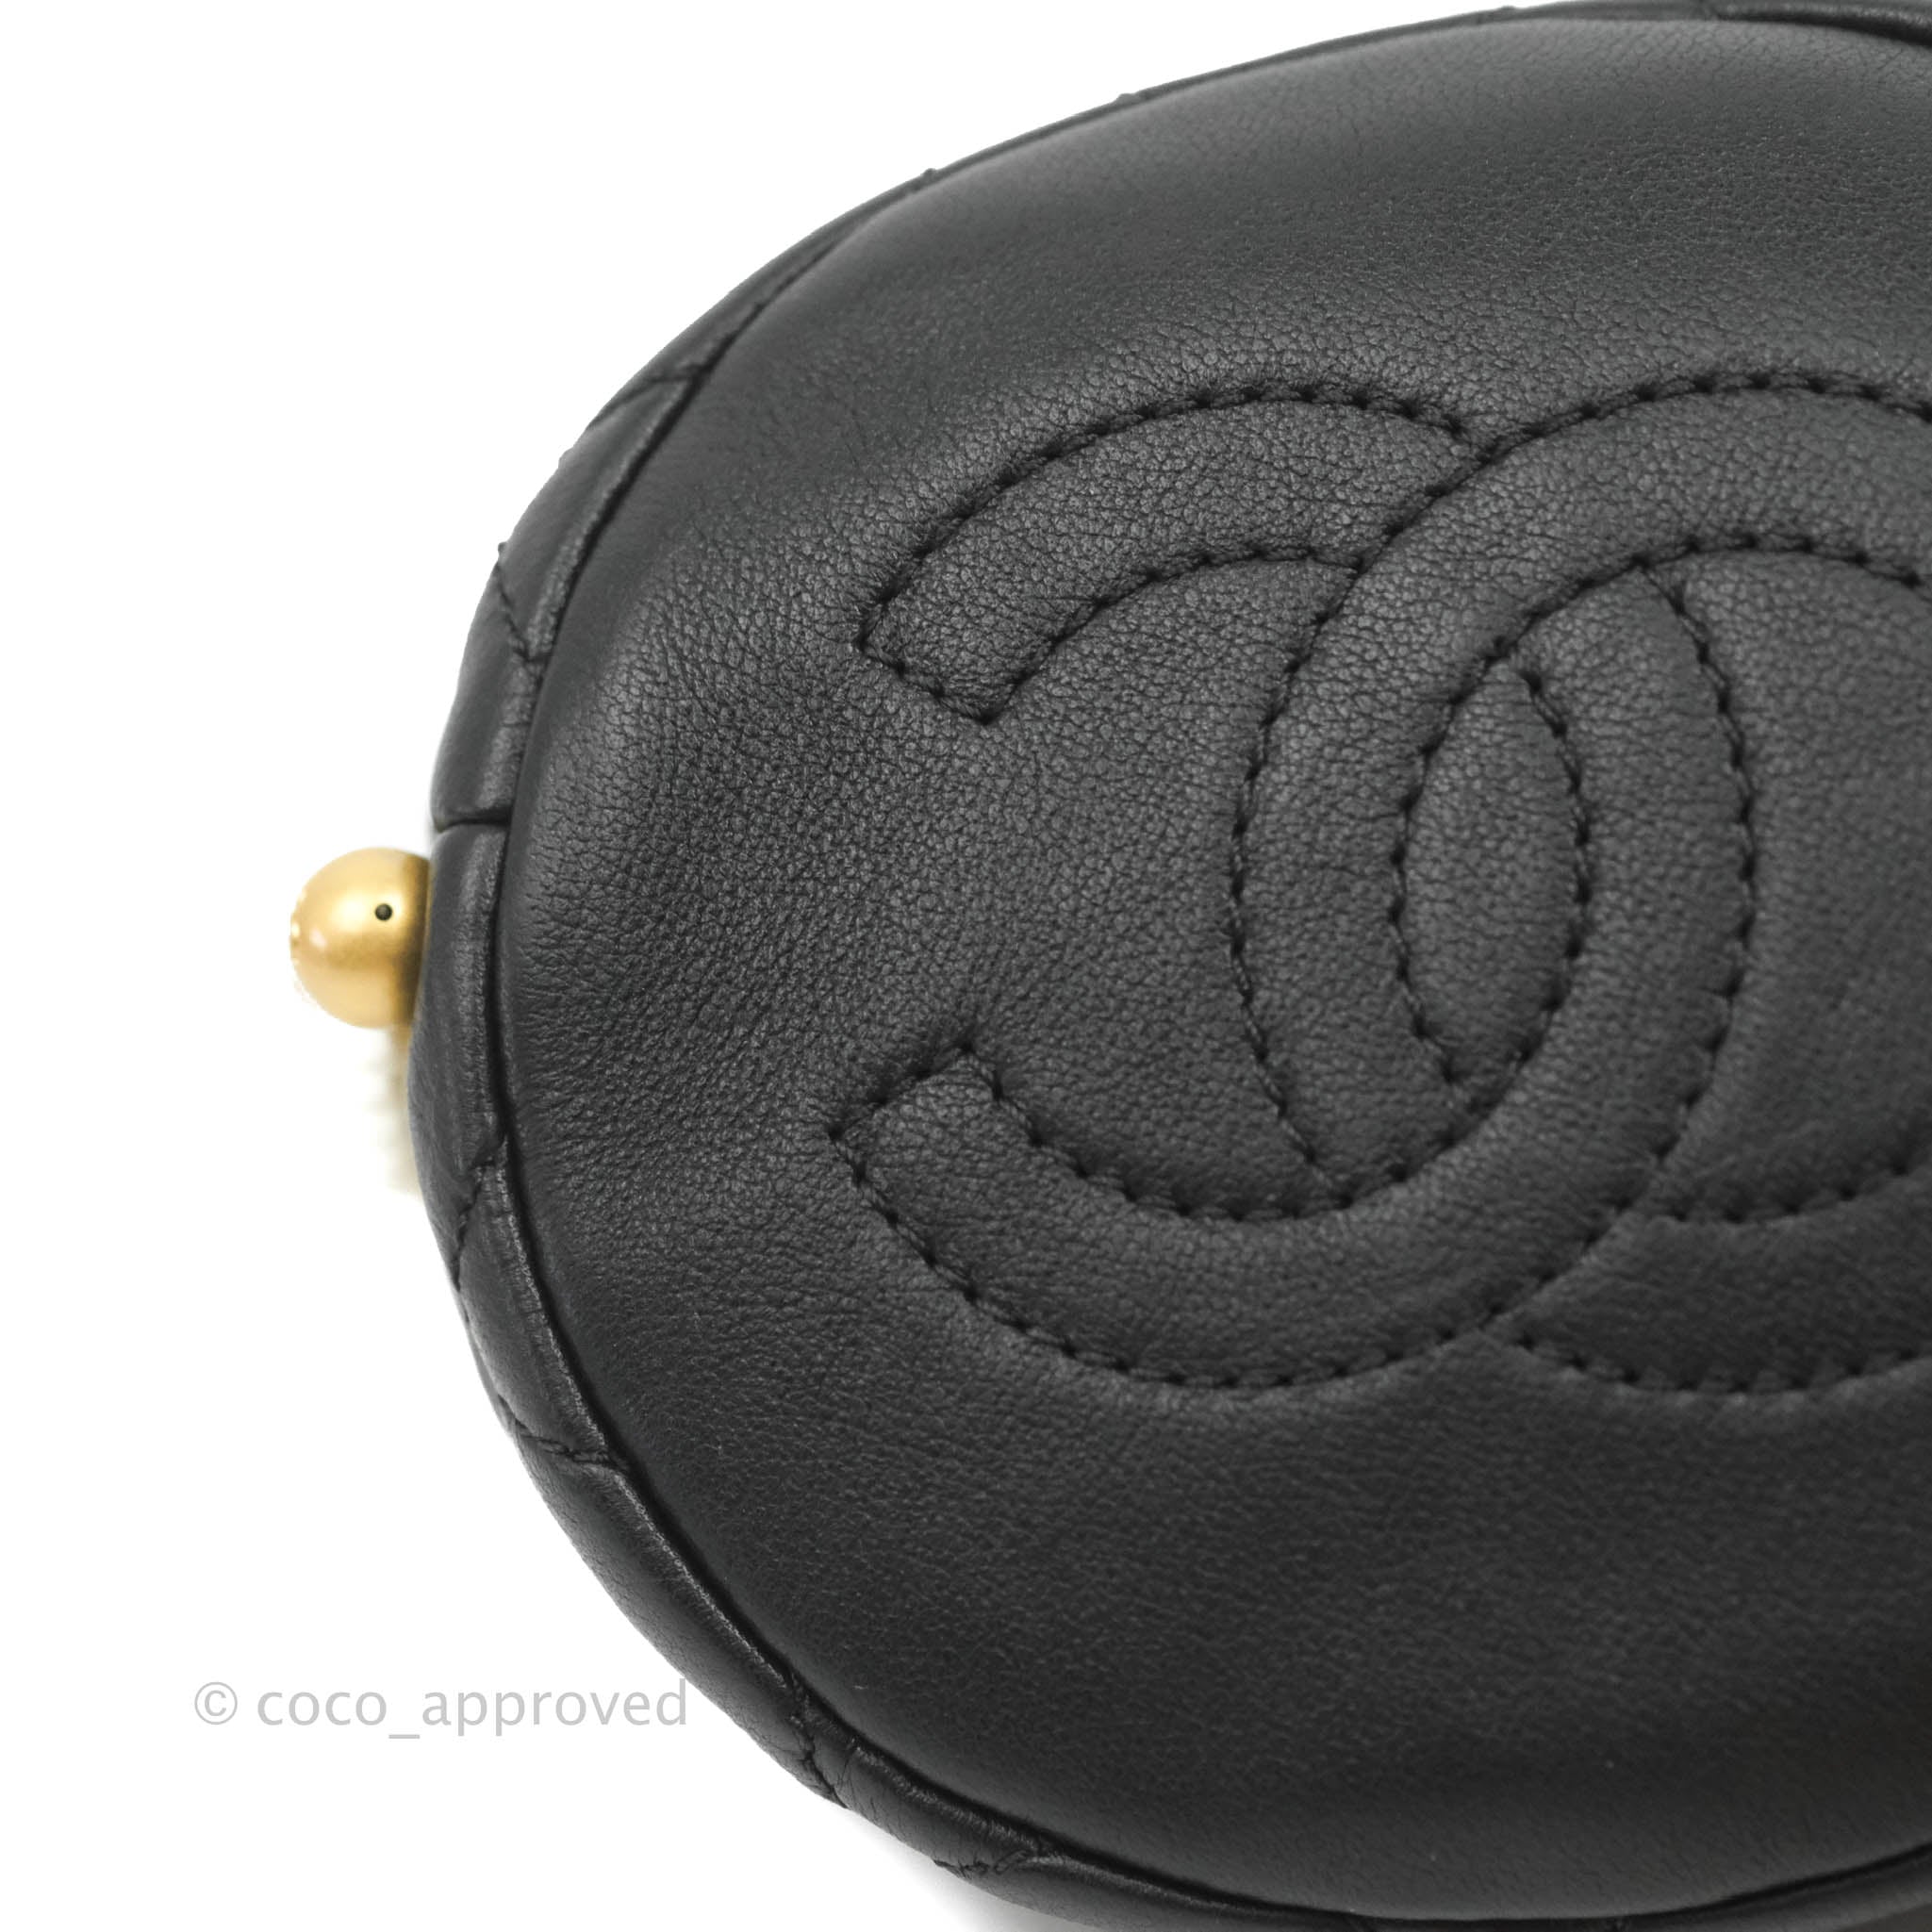 Chanel About Pearls Mini Drawstring Quilted Leather Bucket Bag NWT